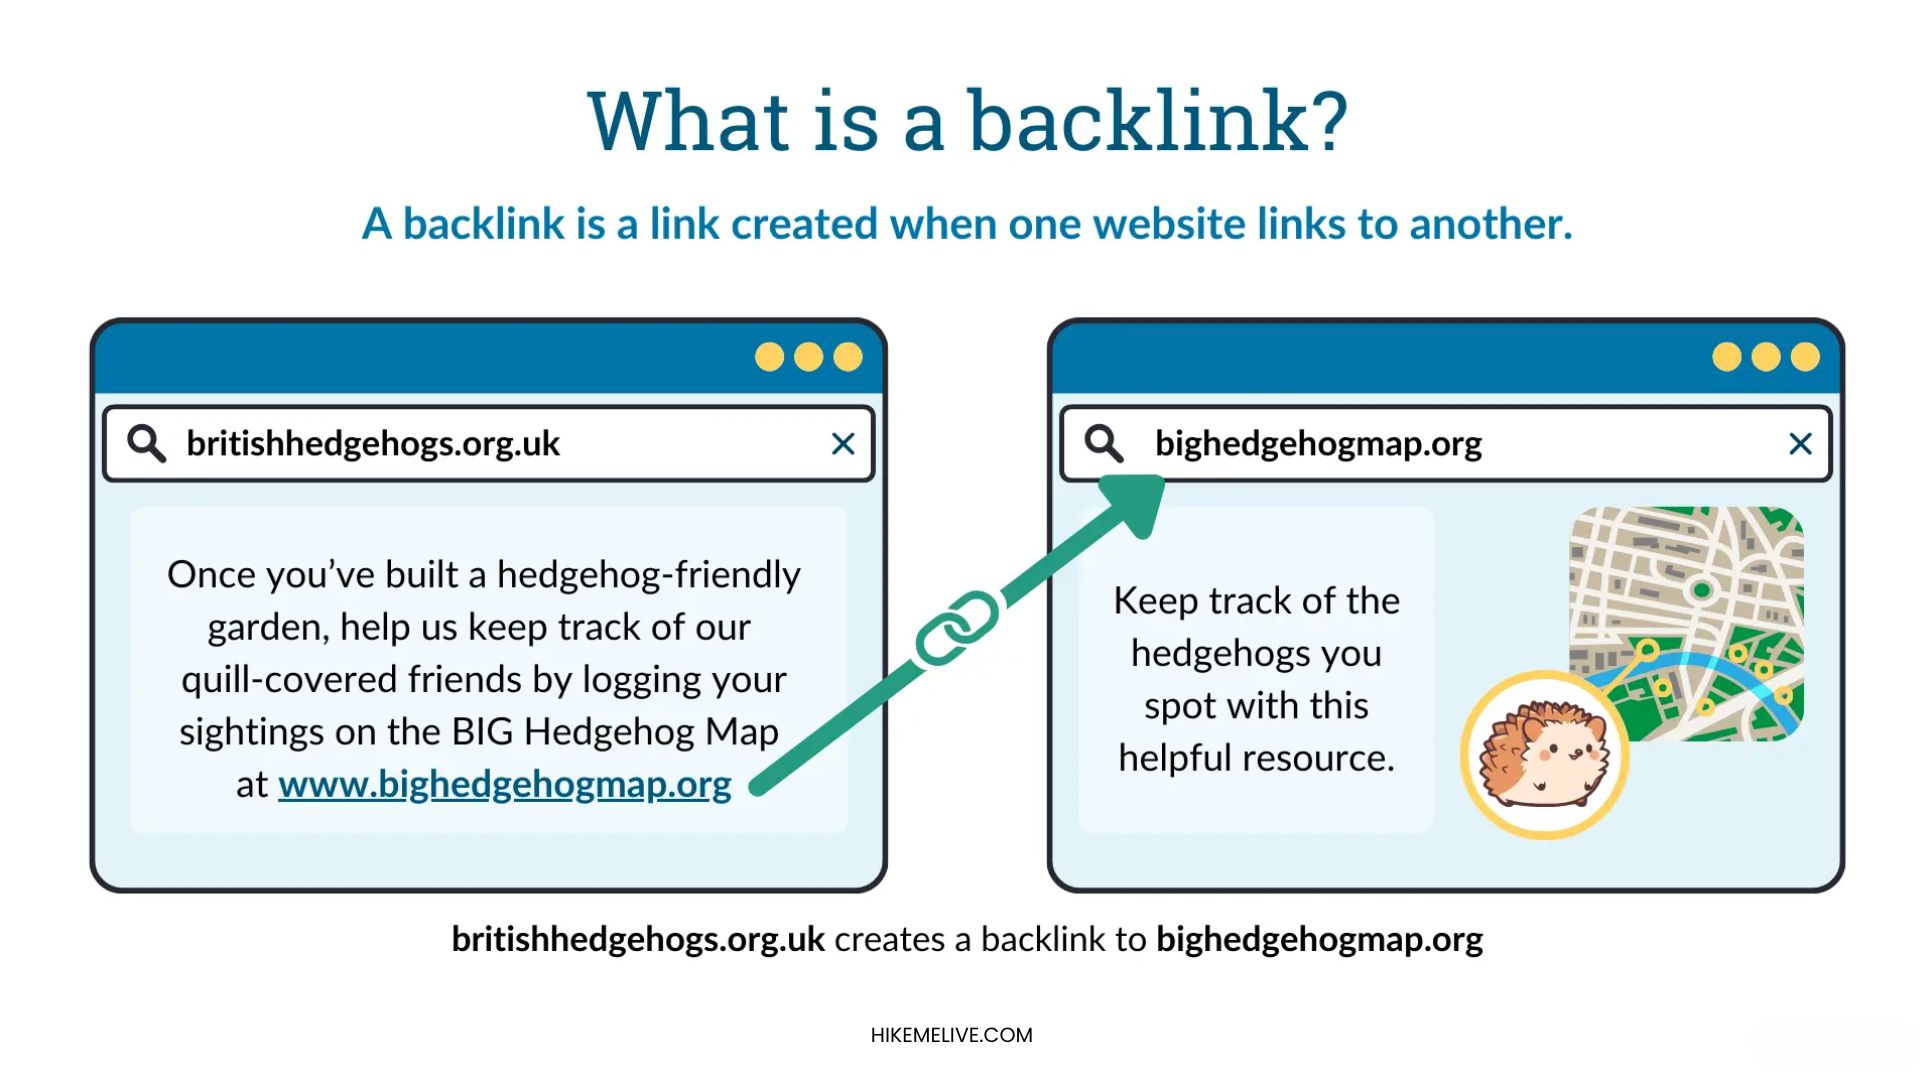 What Are Backlinks in SEO & Benefits Beginner Guide